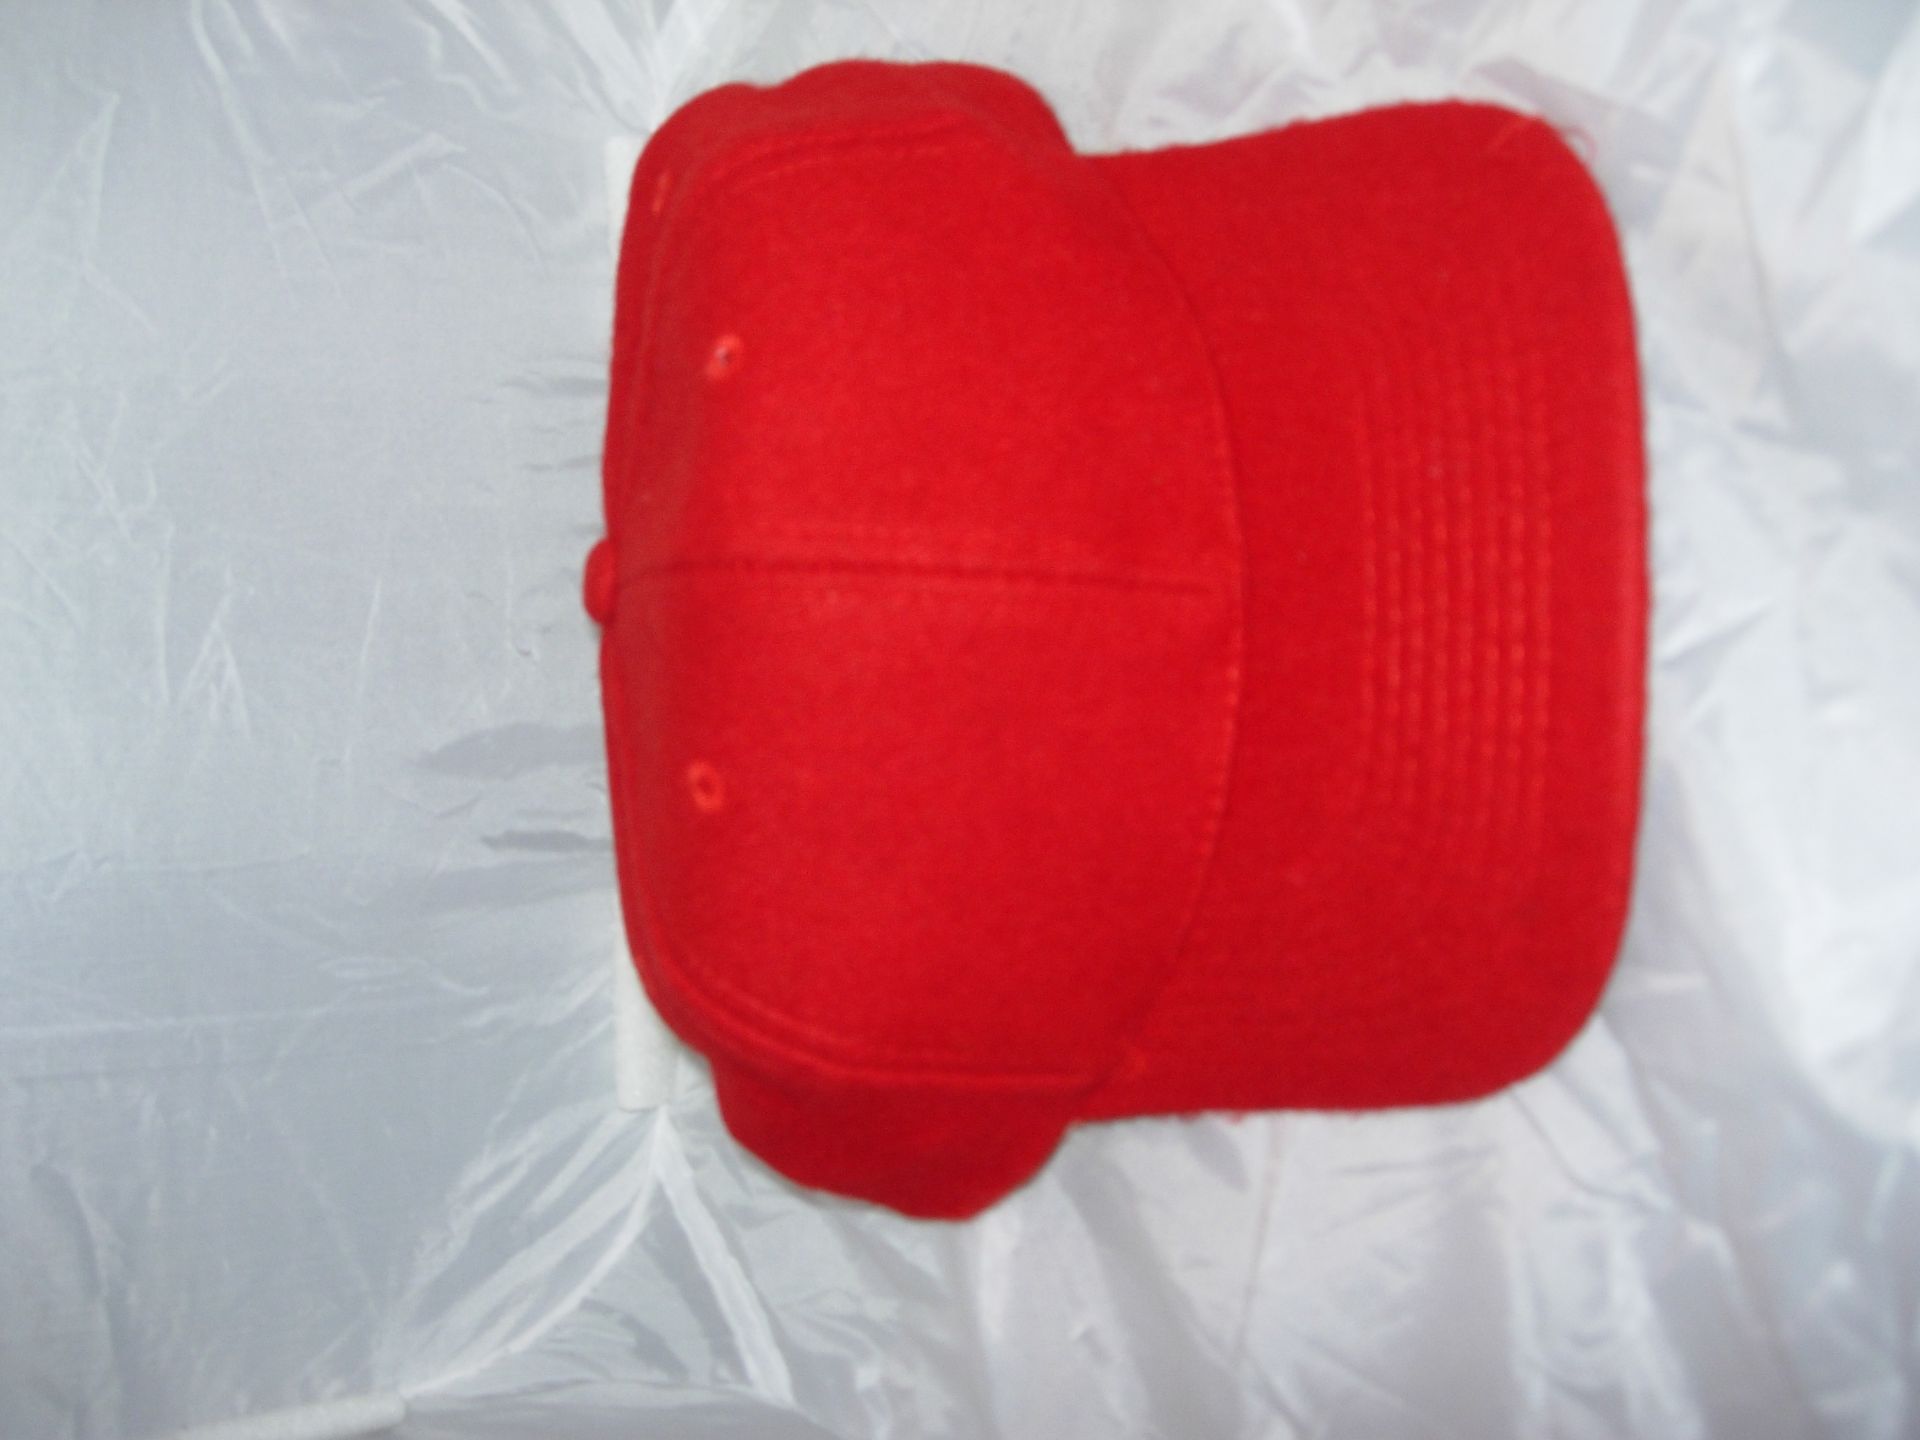 1 Bx Of 144 Red Baseball Caps - Image 2 of 2